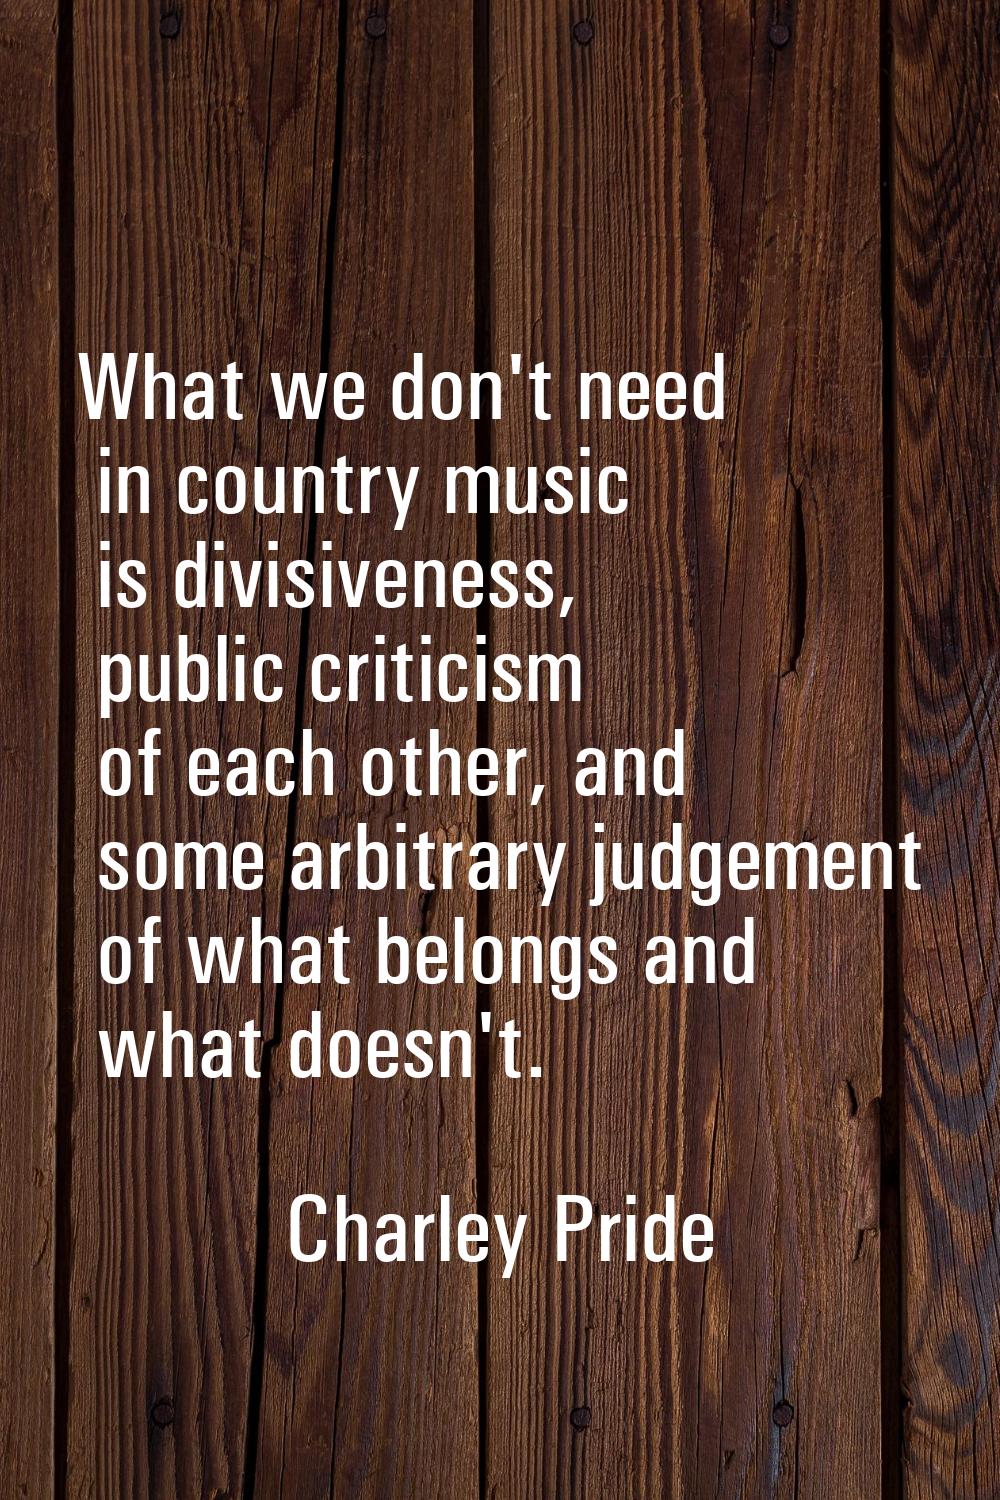 What we don't need in country music is divisiveness, public criticism of each other, and some arbit